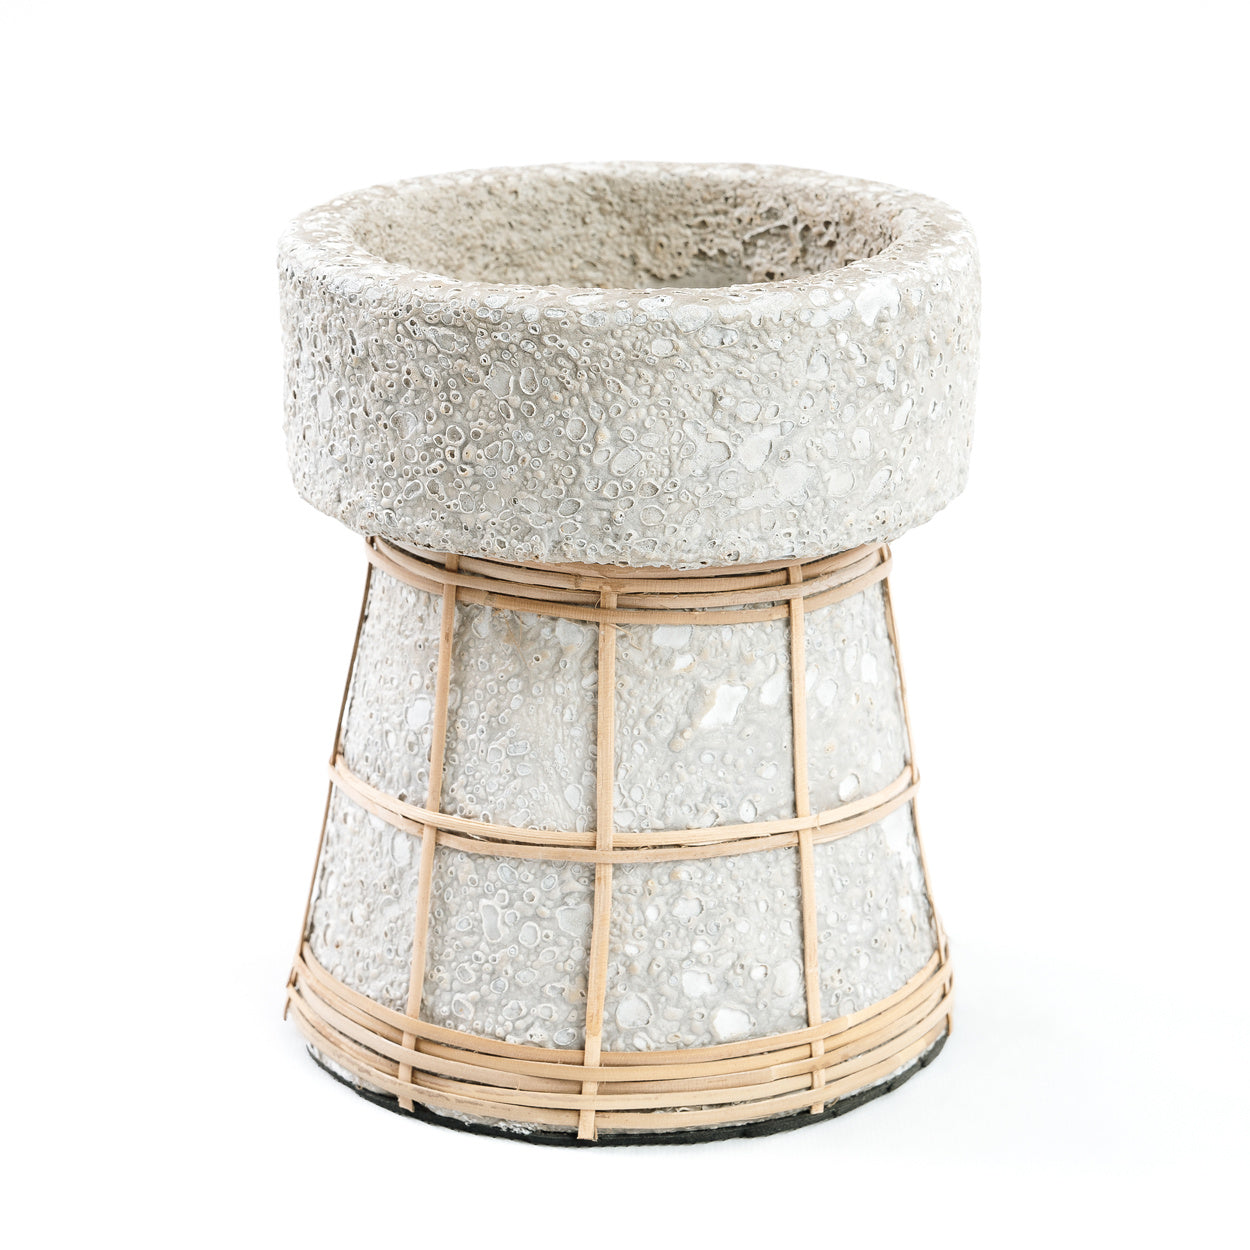 THE SERENE Candle Holder - Concrete Natural Medium Size